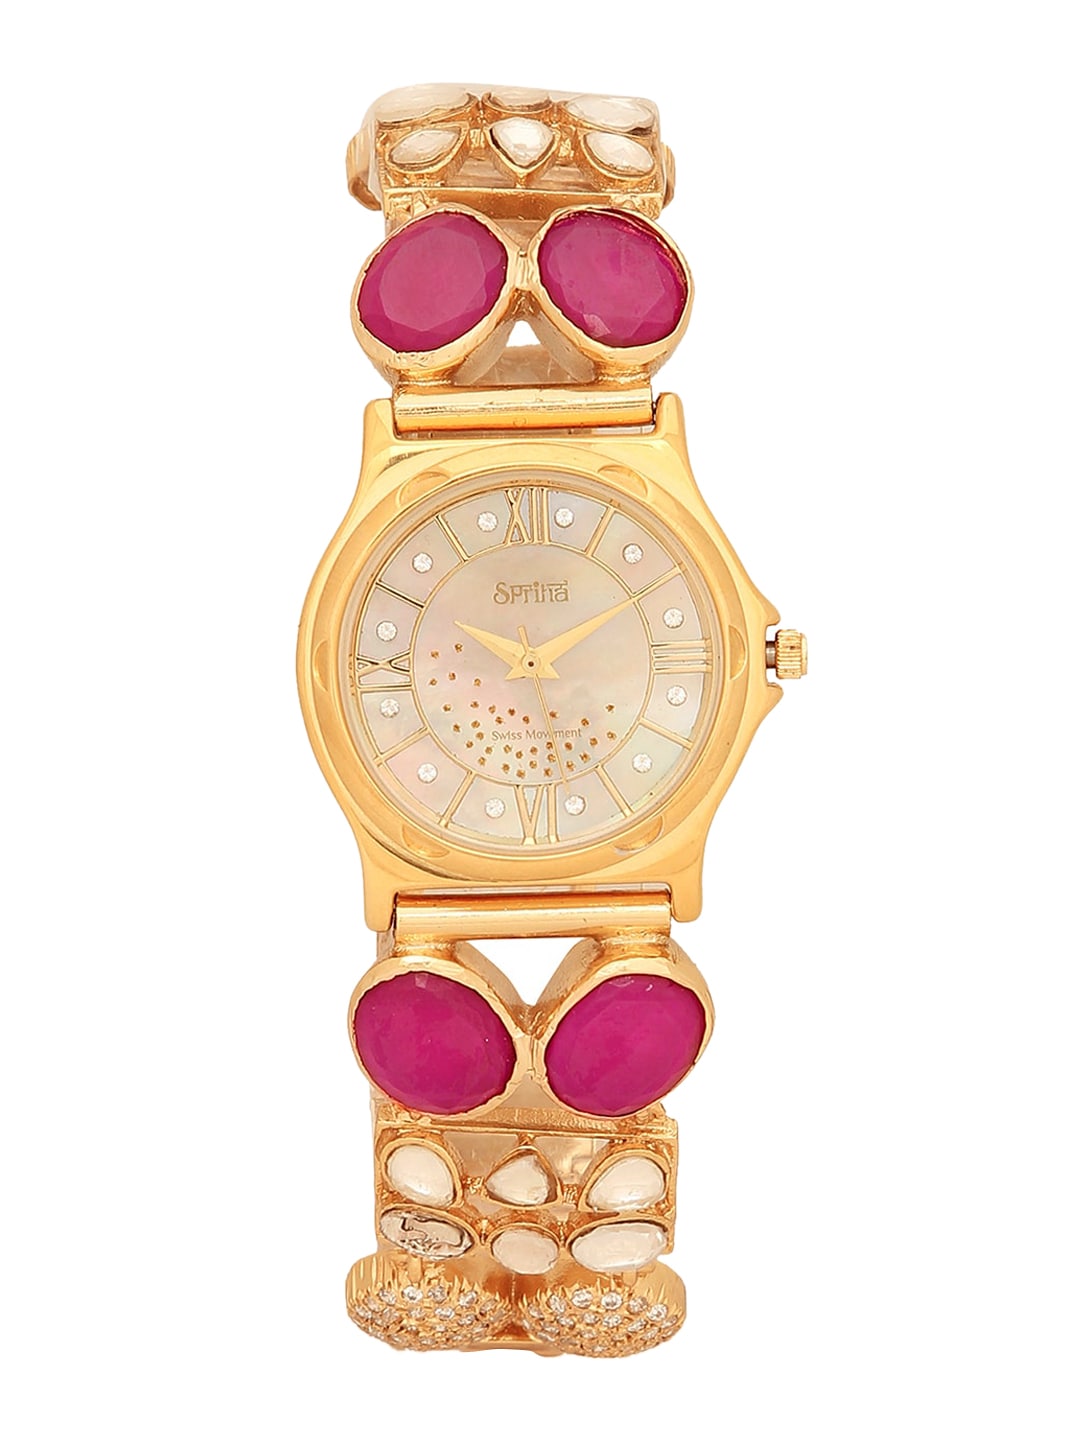 SPRIHA Handcrafted Timepieces Women Gold-Toned & Magenta Analogue Watch SEKD2RG Price in India